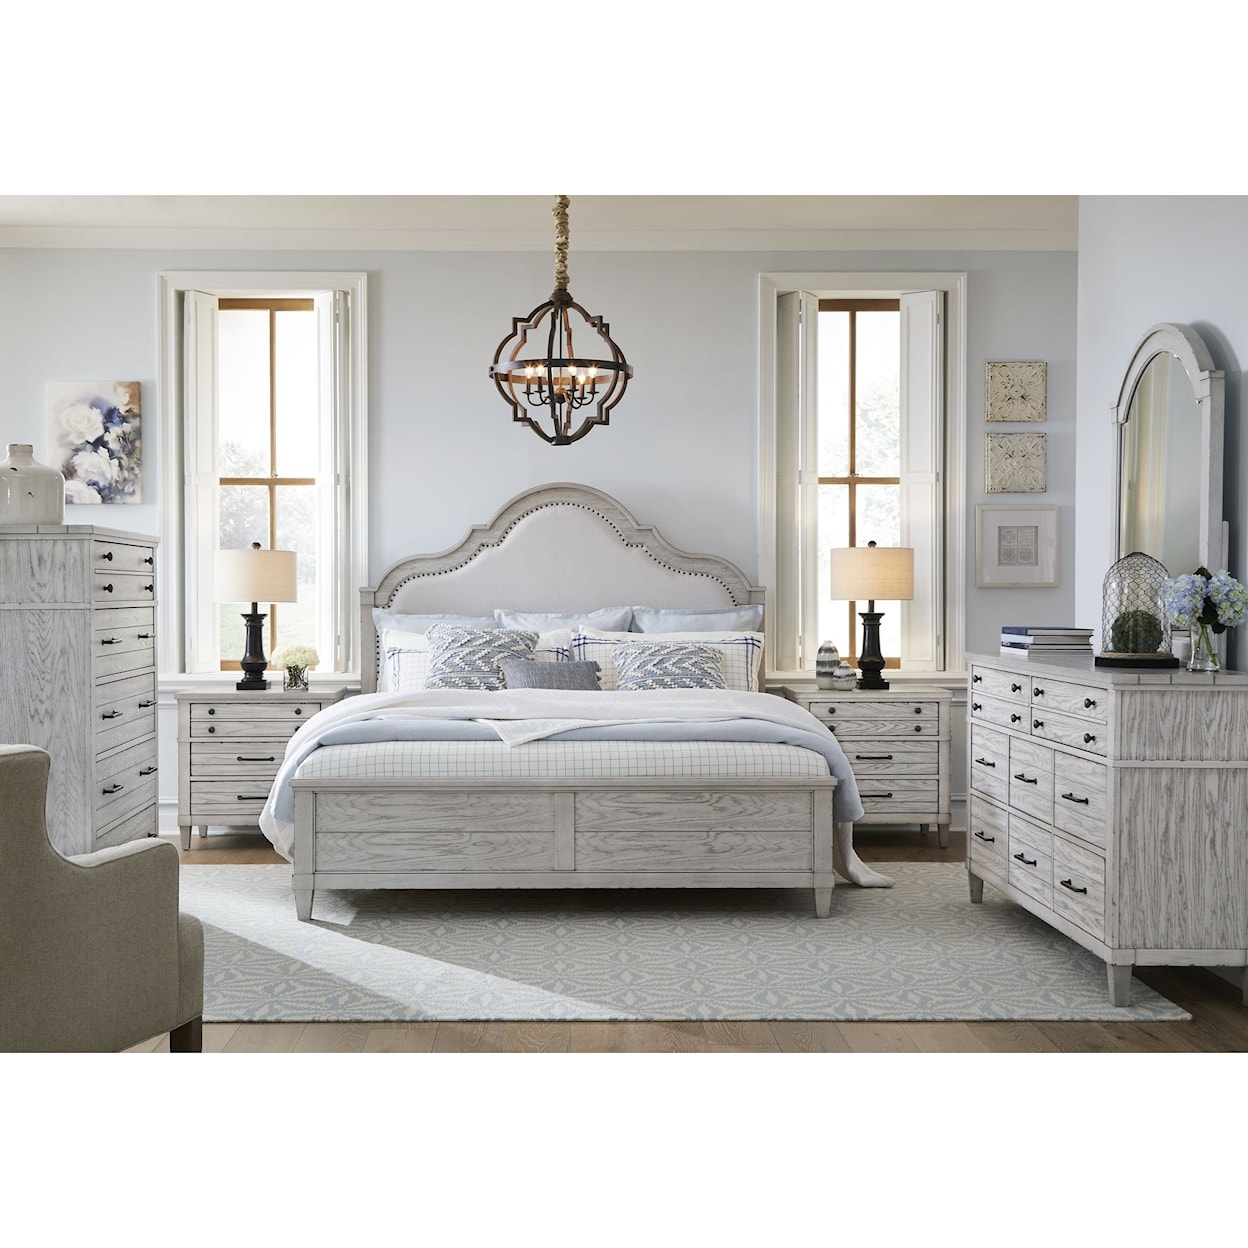 Legacy Classic Belhaven King Bedroom Group